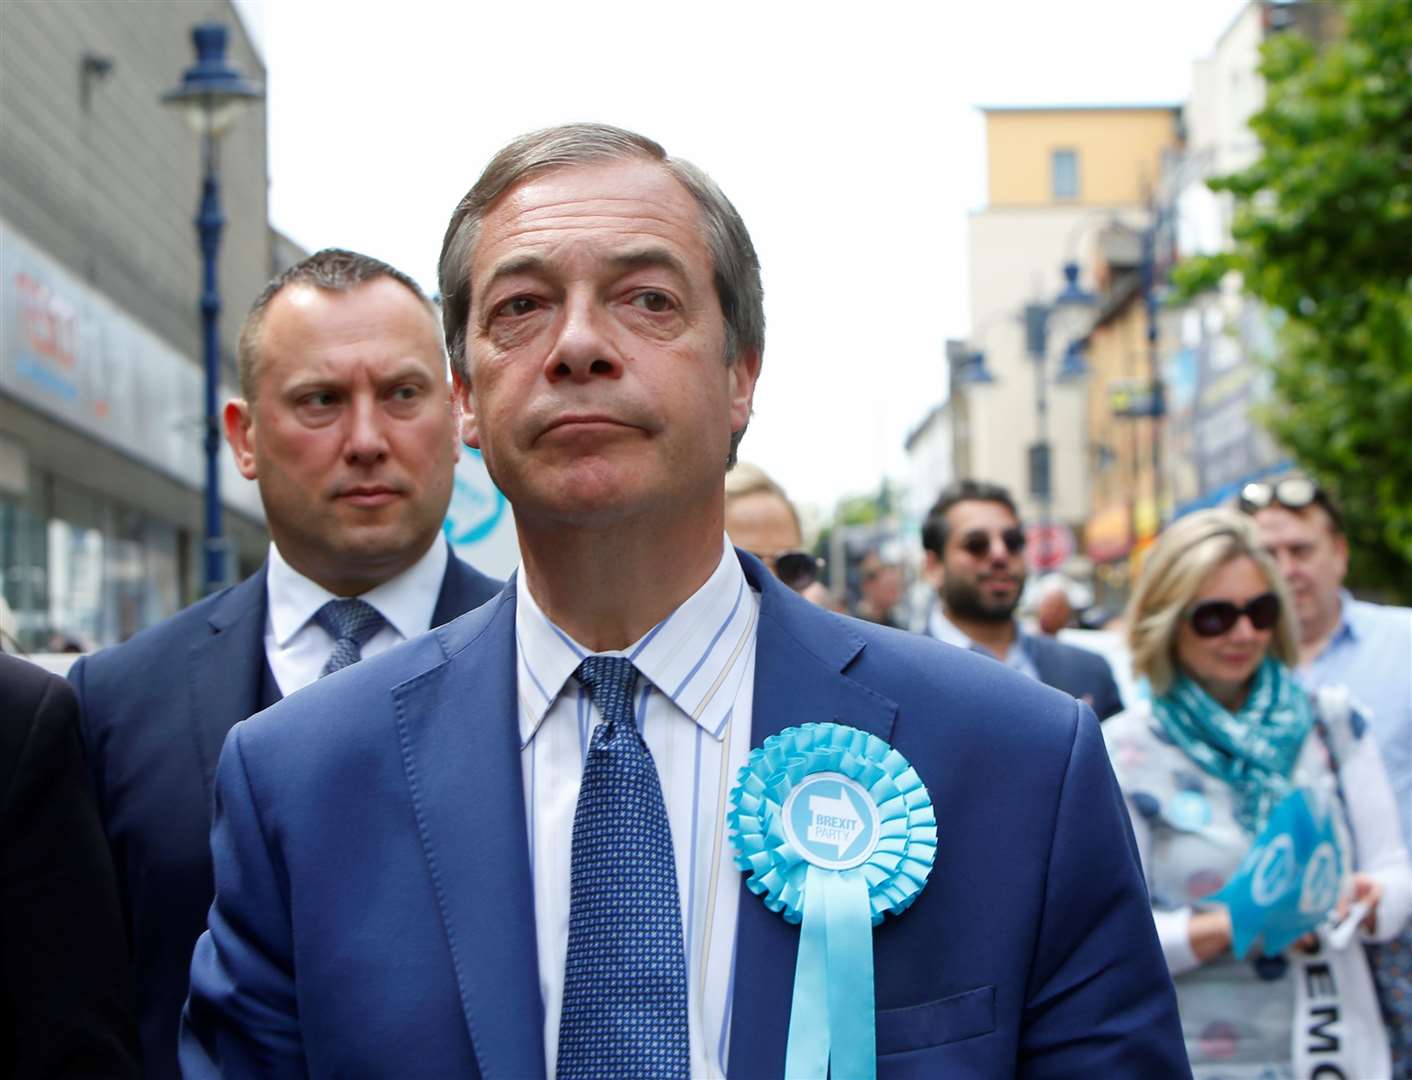 Nigel Farage served as the MEP for South East England and was the former leader of UKIP